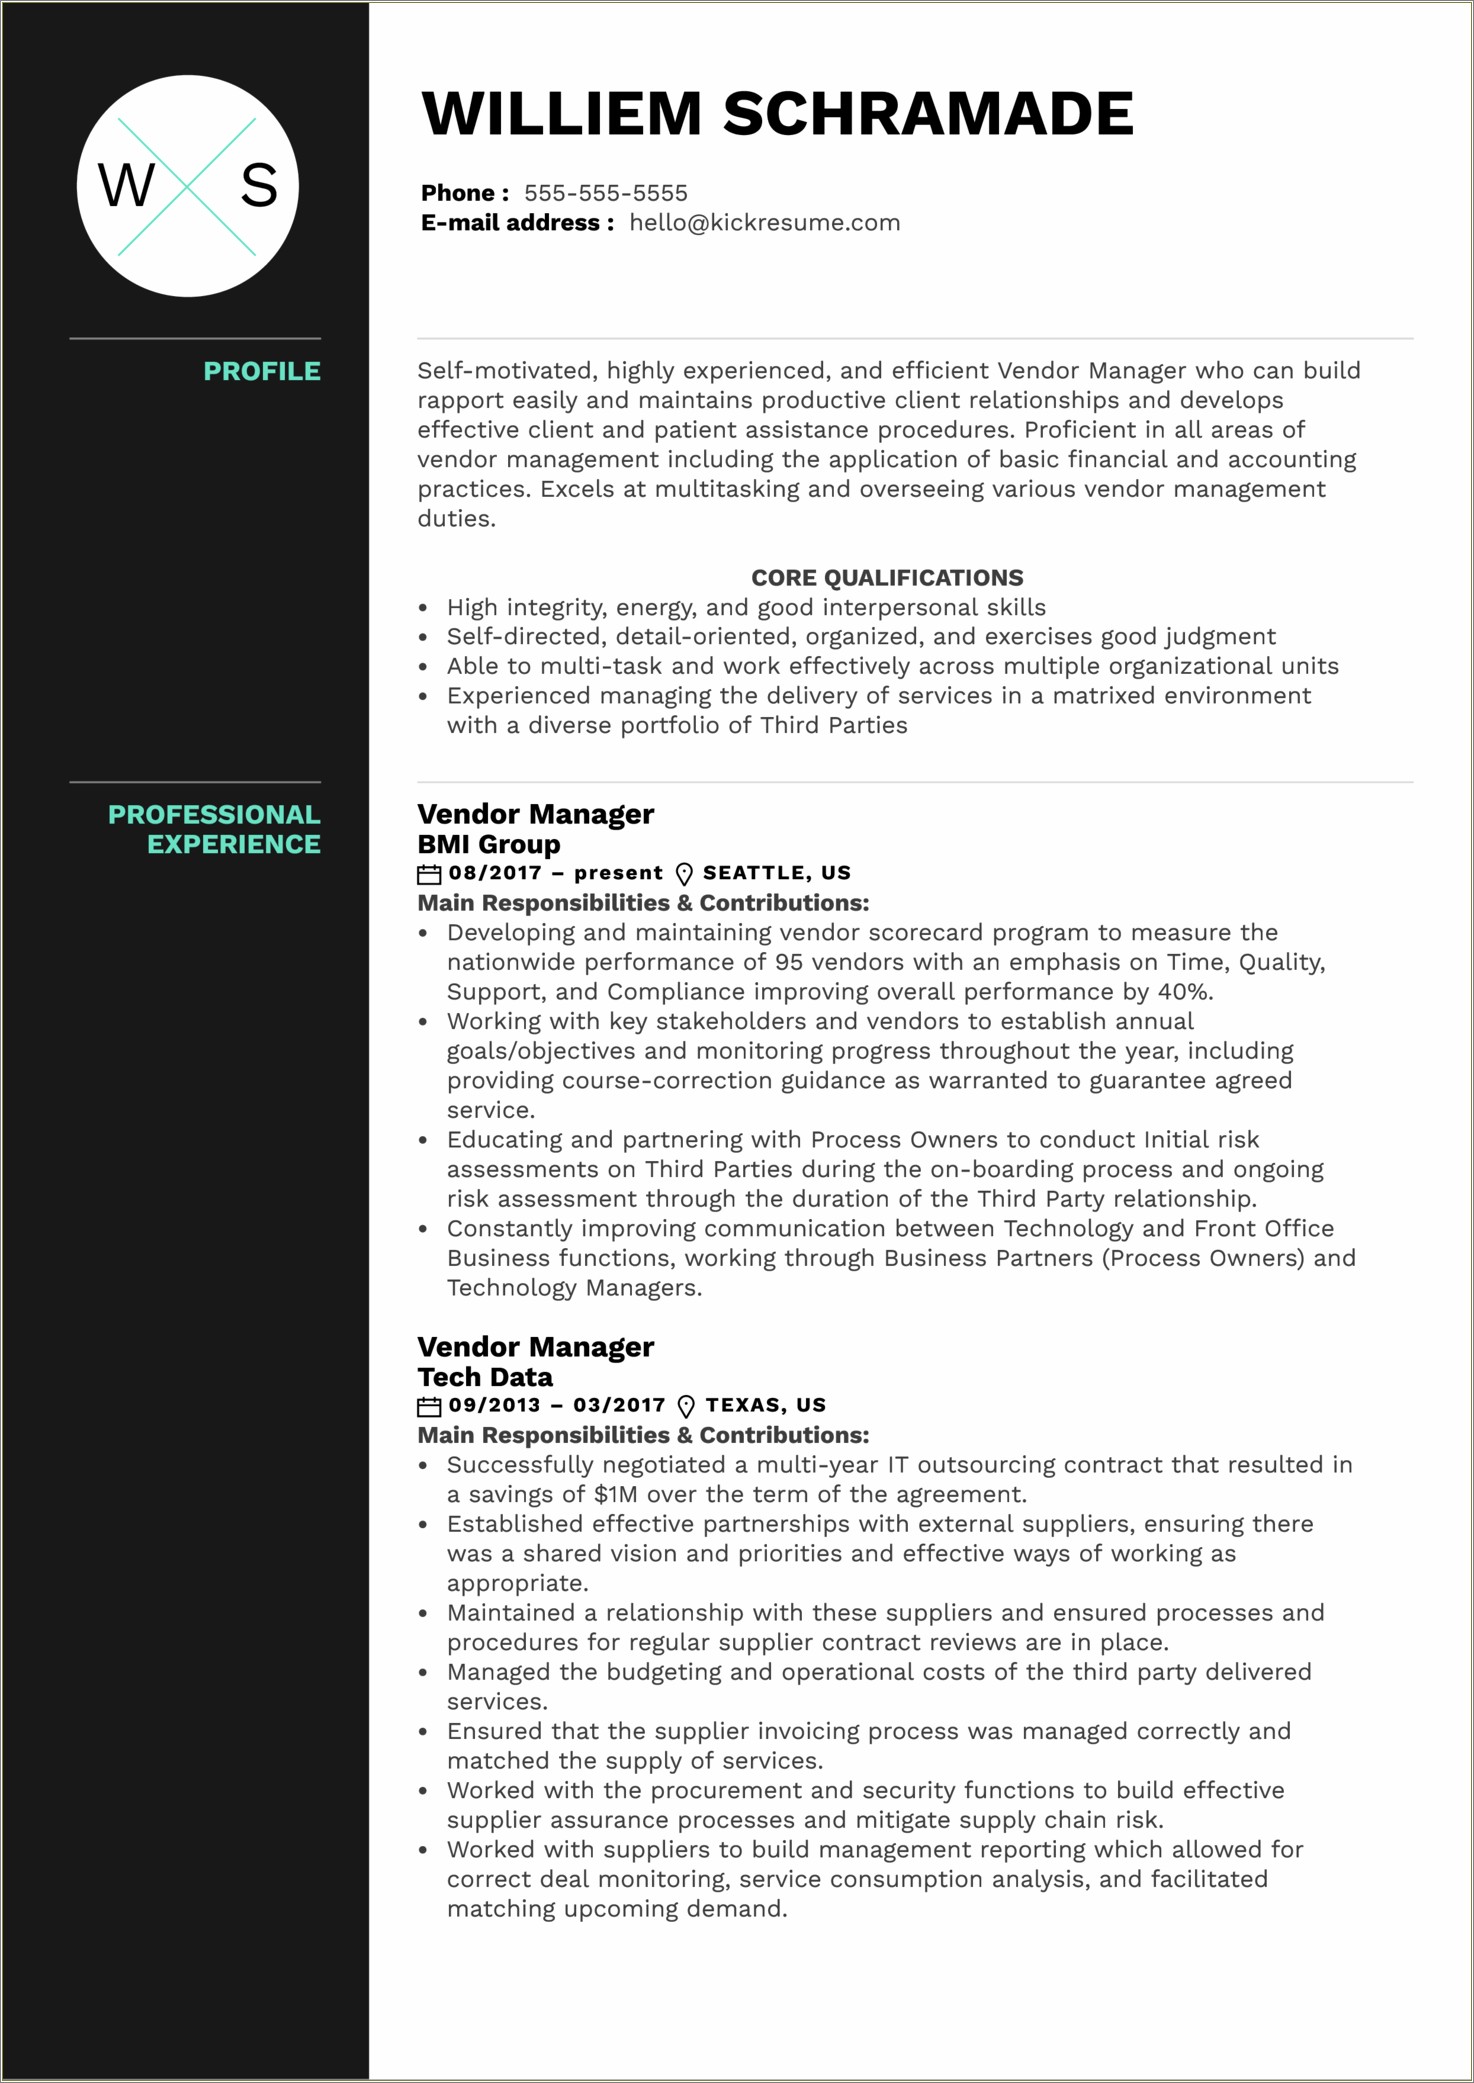 Interpersonal Skills To Put In Resume